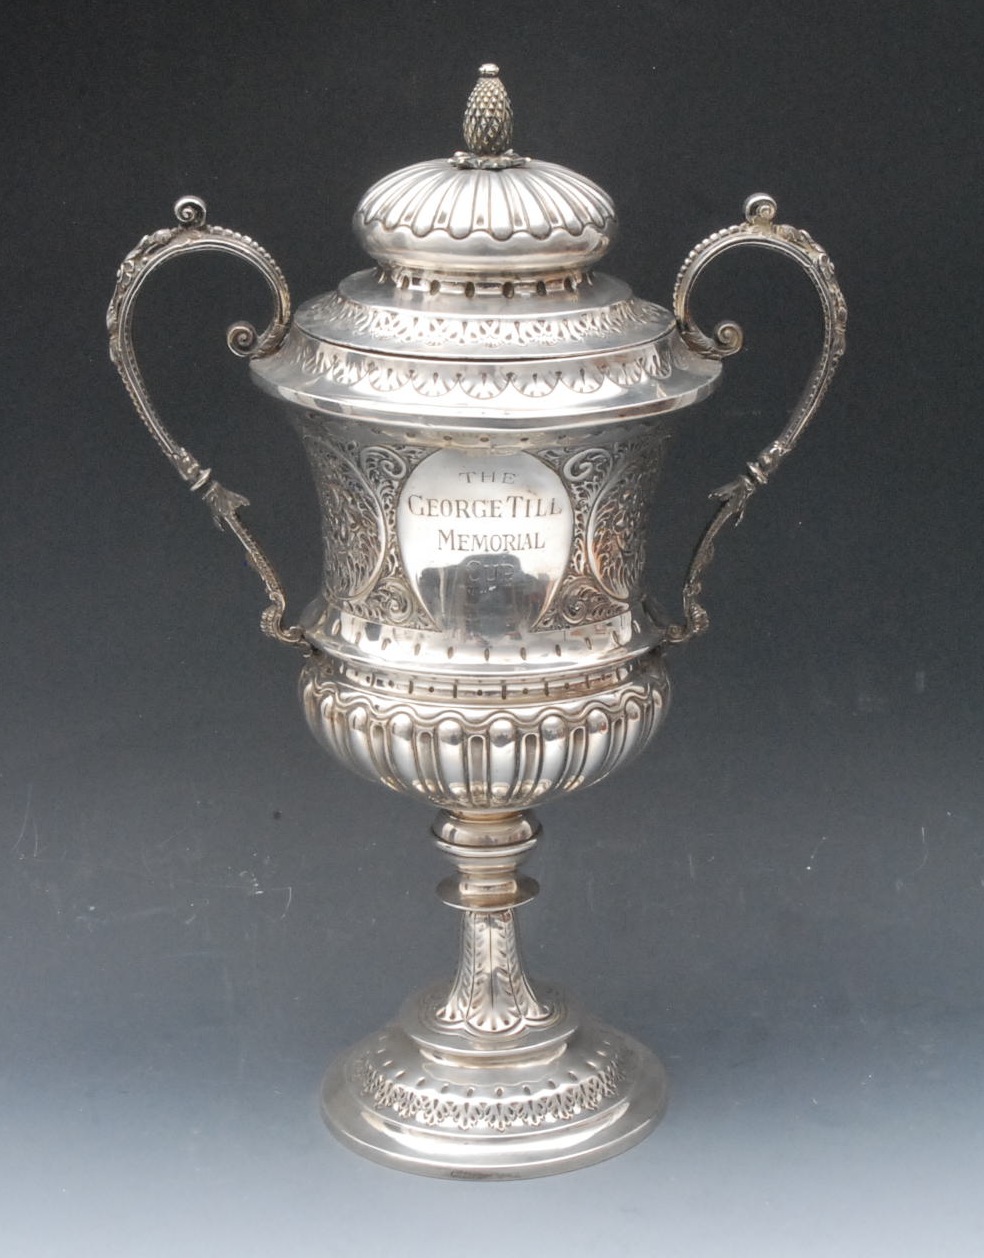 A Victorian campana pedestal trophy cup, The George Till Memorial Cup, fluted bun cover with pine